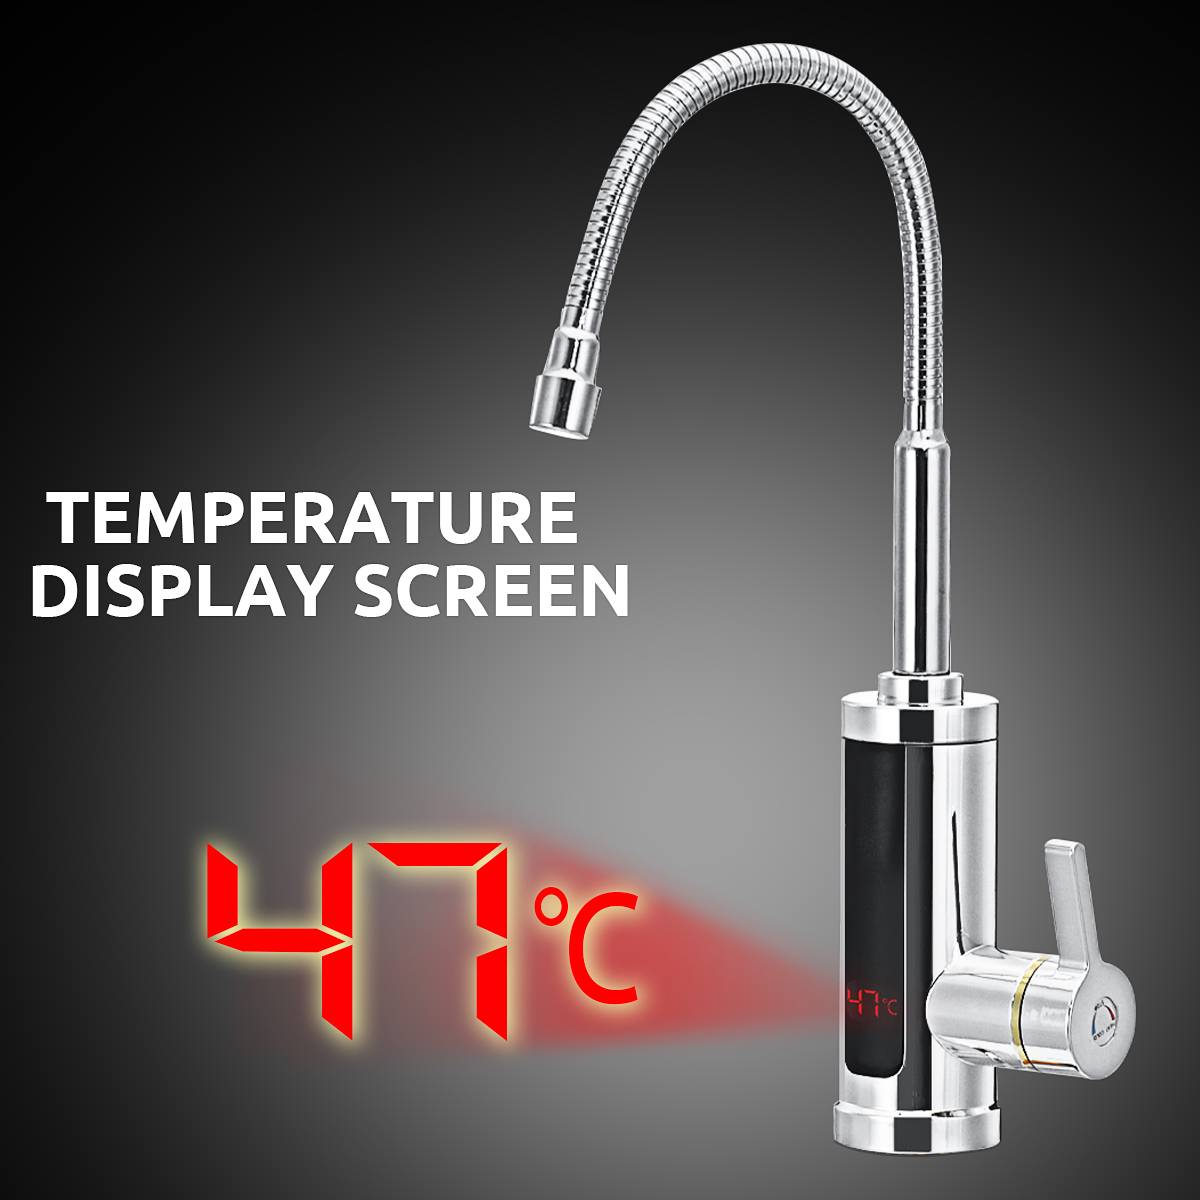 3000W 220V Electric Kitchen Flow Water Heater Tap Instant Hot Water Faucet Heater Cold Heating Tankless Water Heater with LED